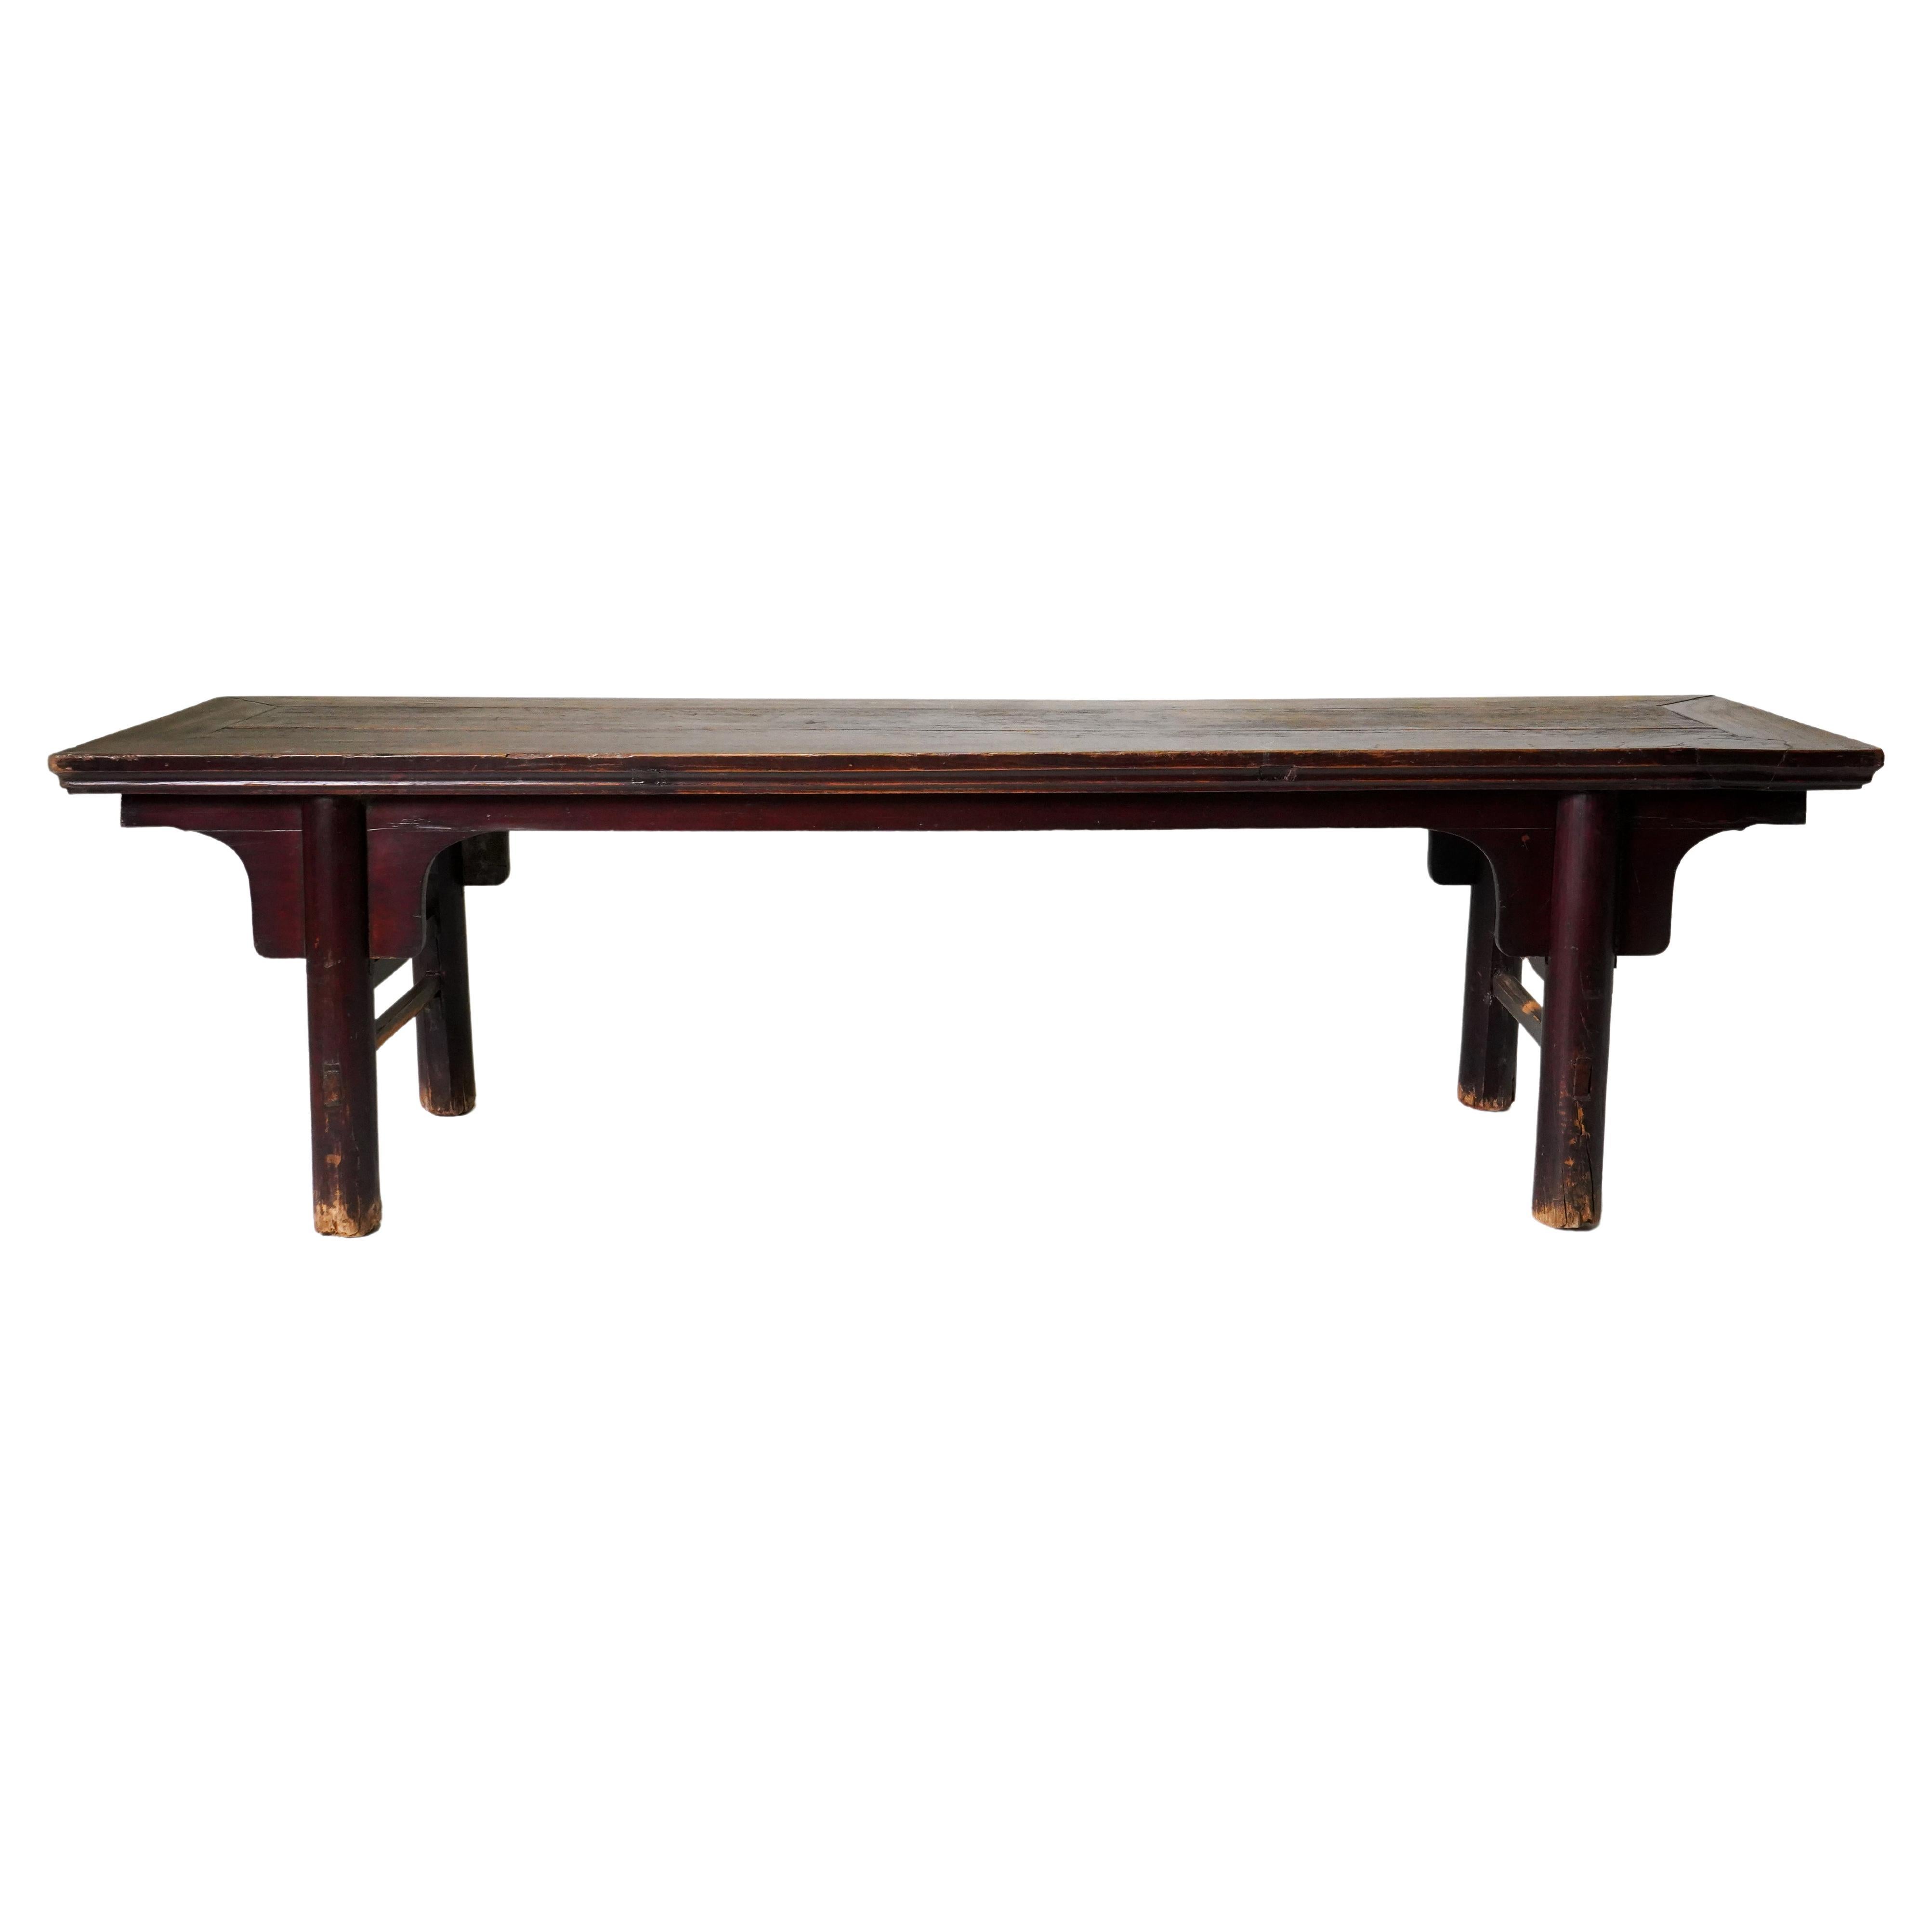 C. 1900 Chinese Long Bench with Round Legs And Original Patina